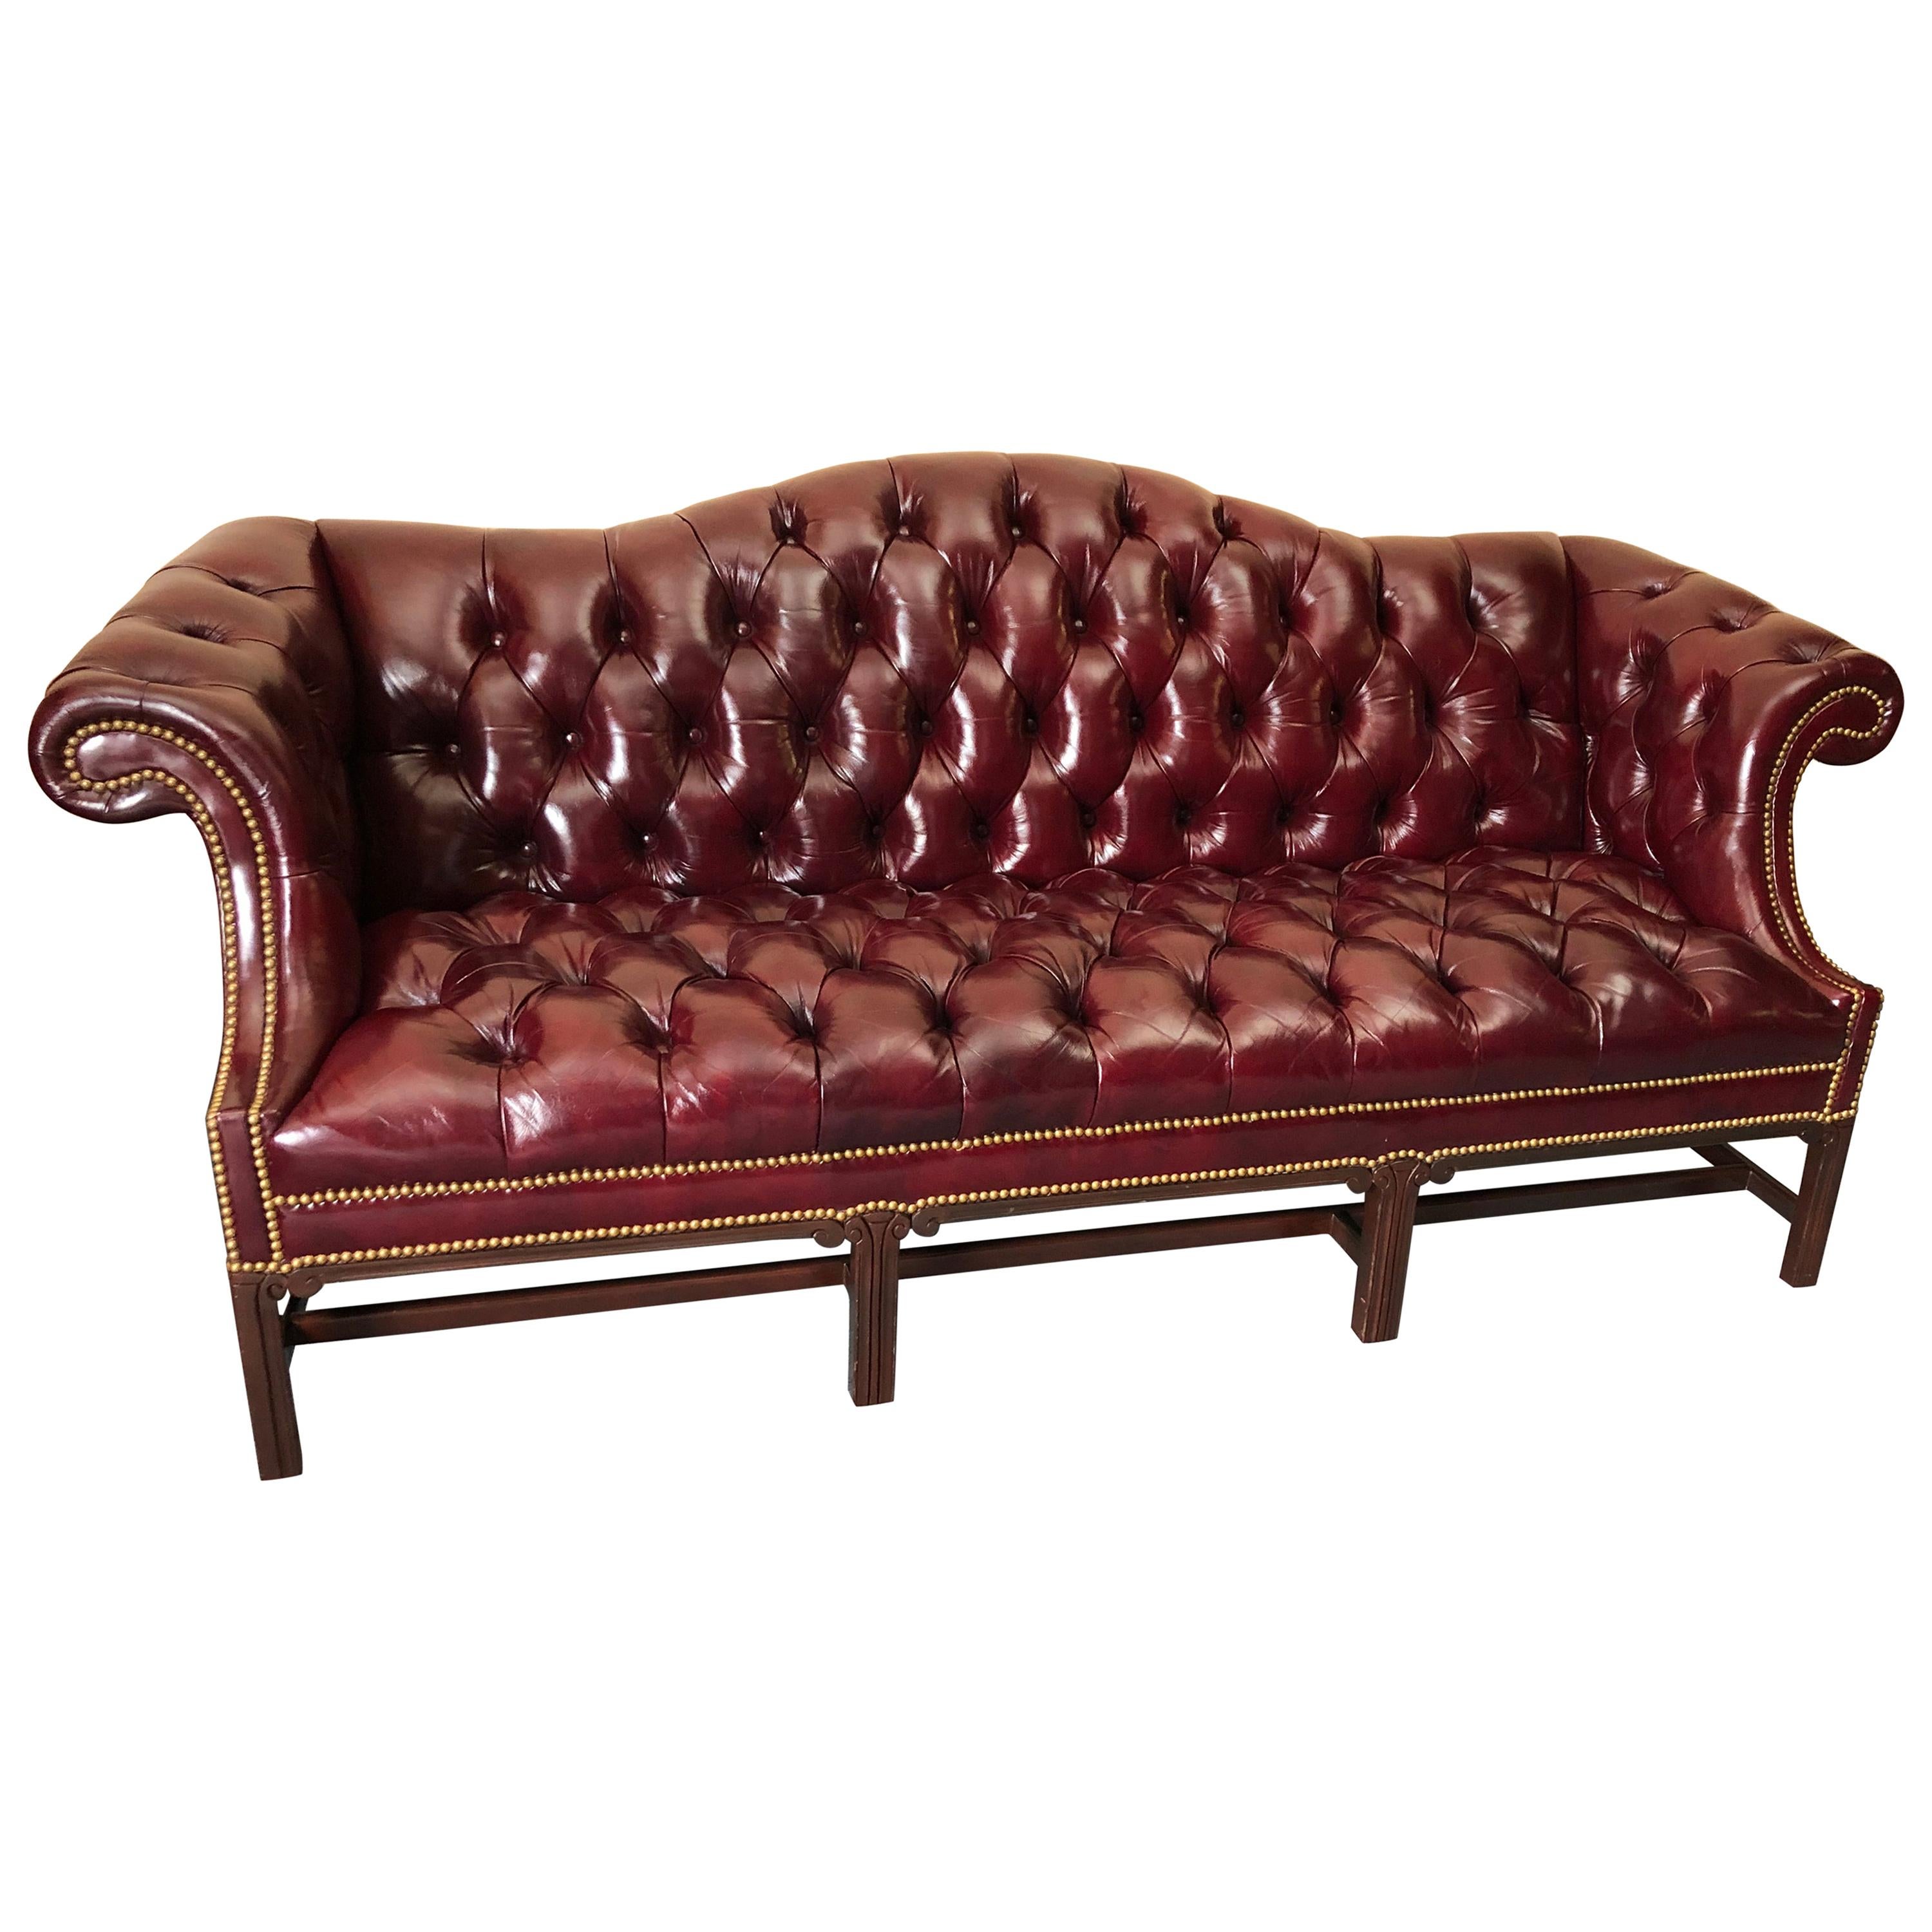 Super Luxurious Hancock & Moore Maroon Tufted Leather Chesterfield Style Sofa